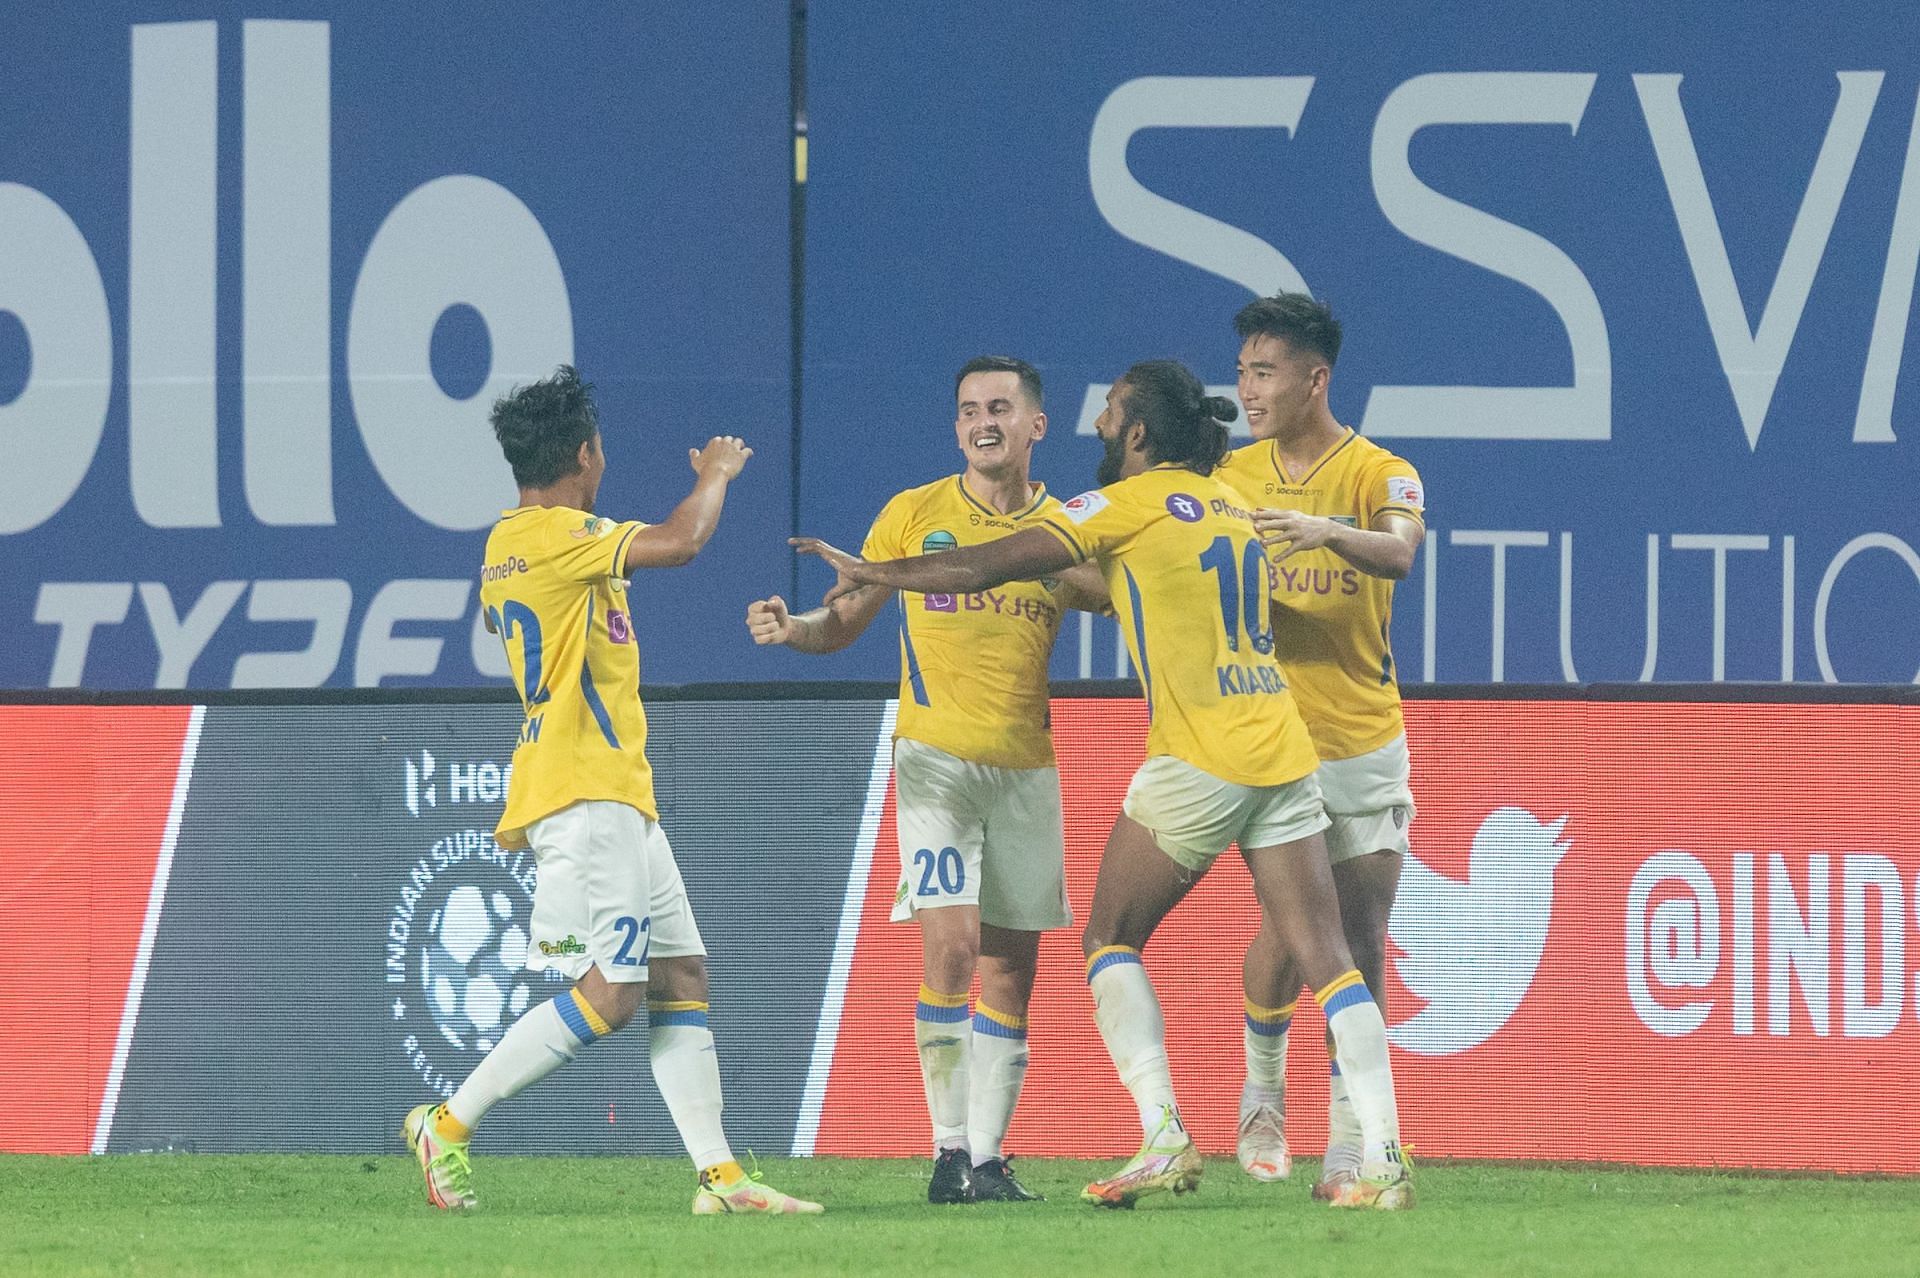 Kerala Blasters FC players celebrate a 3-0 win against Chennaiyin FC in the first-leg tie (Image Courtesy: ISL)